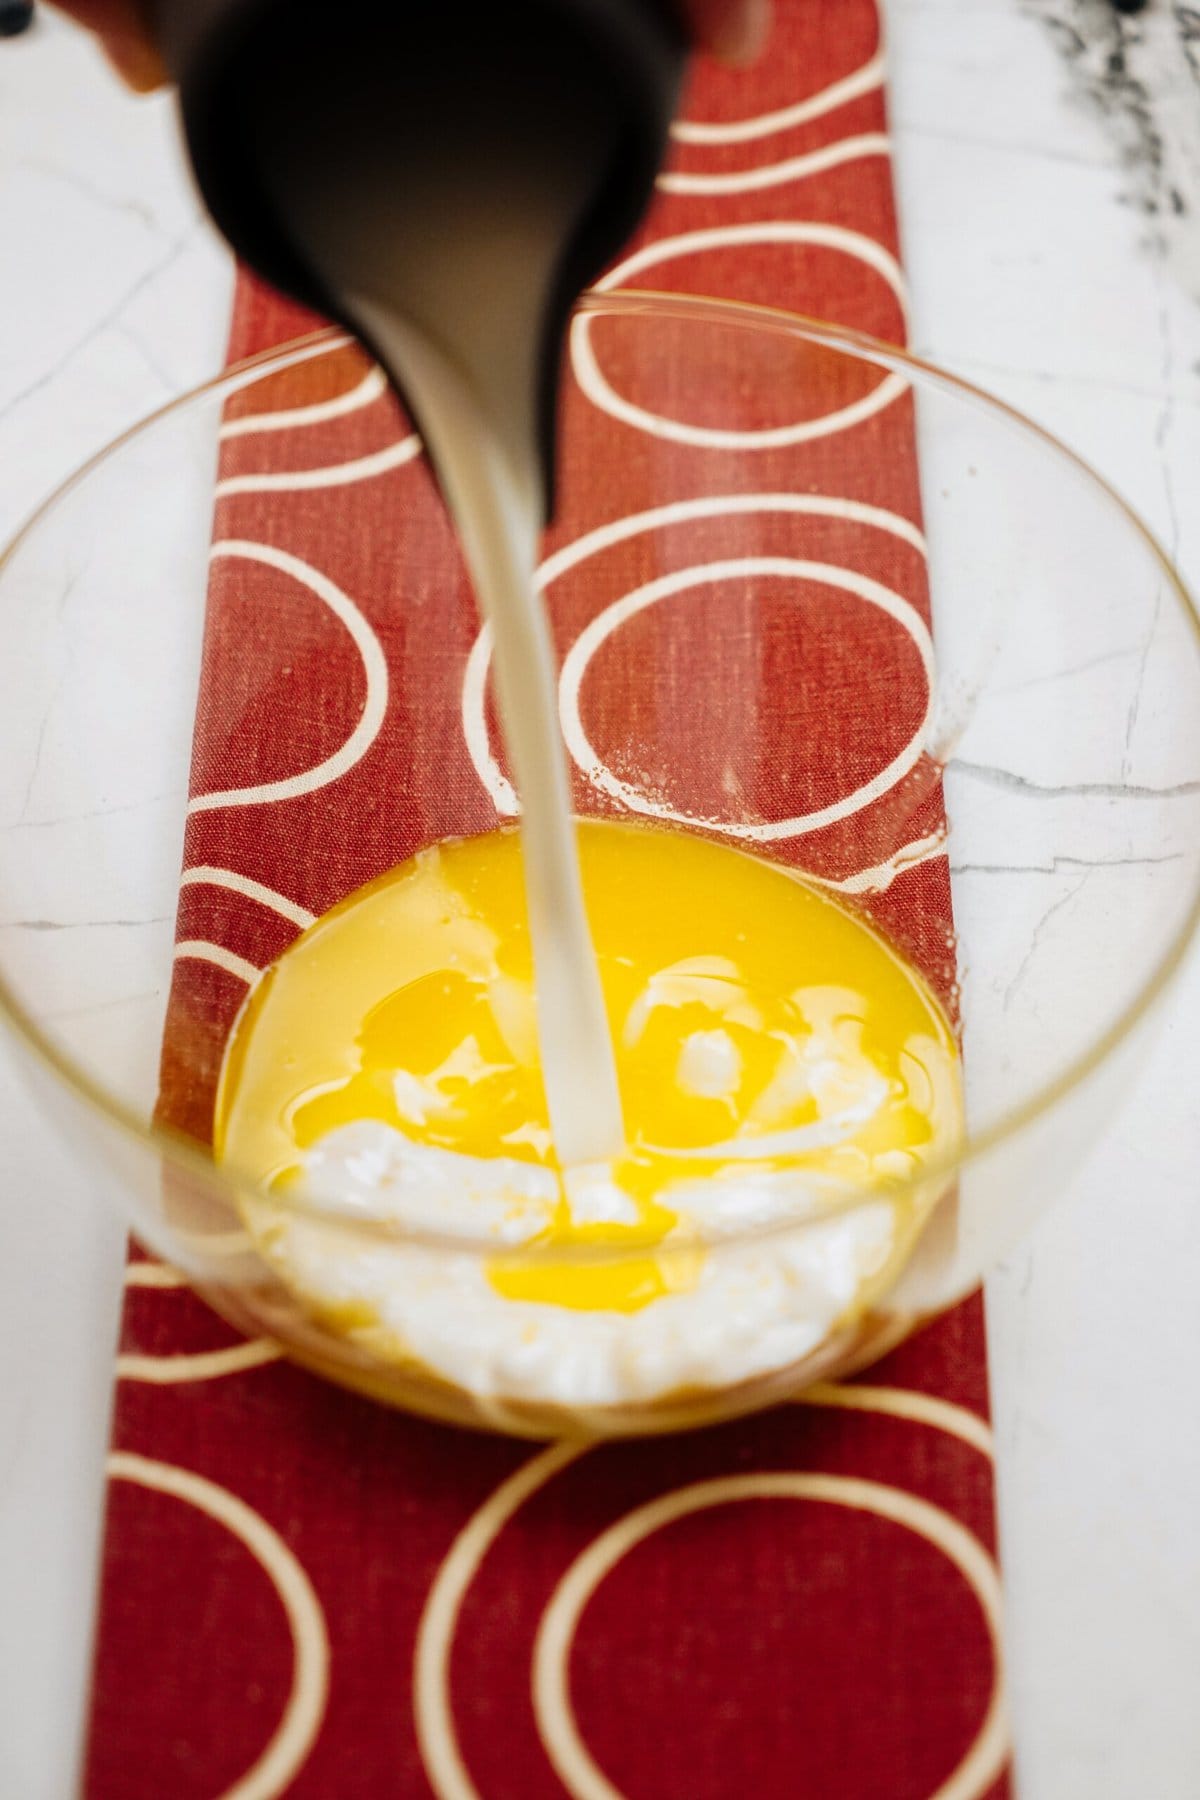 A liquid being poured into a glass mixing bowl containing beaten eggs on a red patterned surface, evoking the comforting aroma of freshly baked cinnamon rolls.